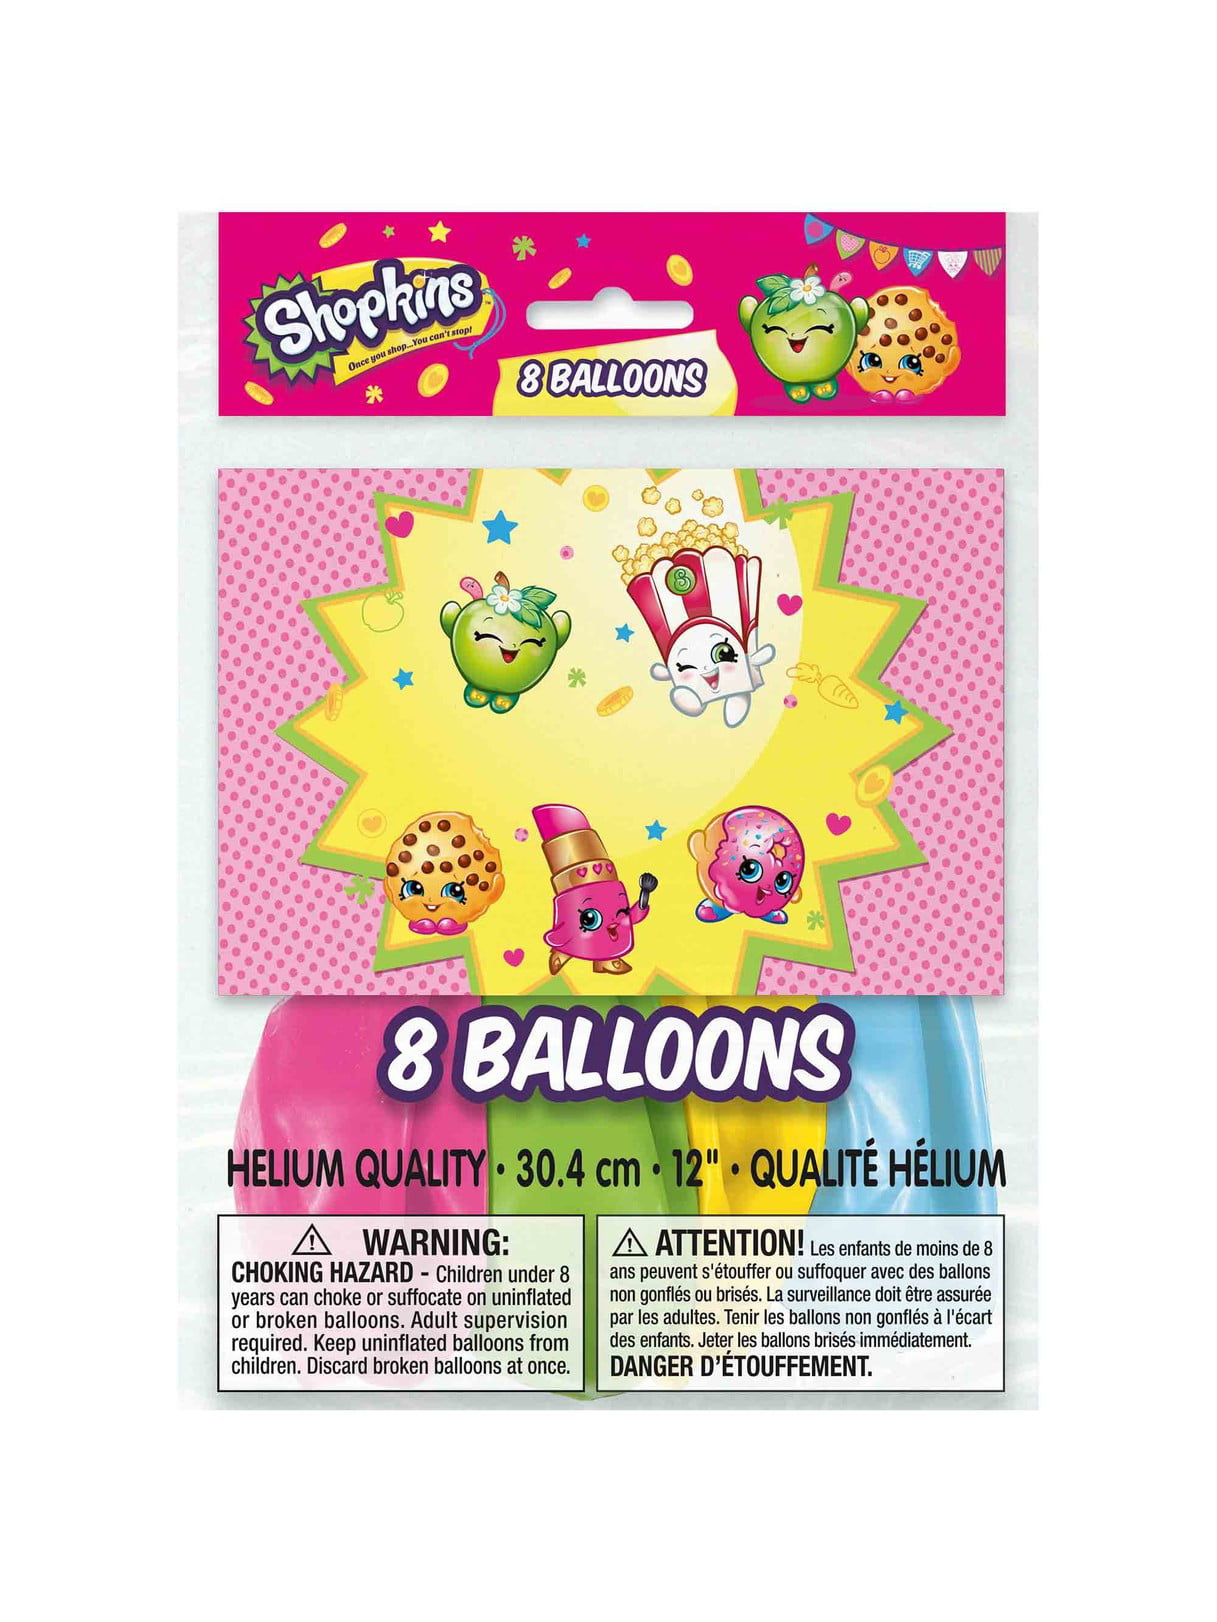 8ct 7.5 x 9 inches Shopkins Goodie Bags